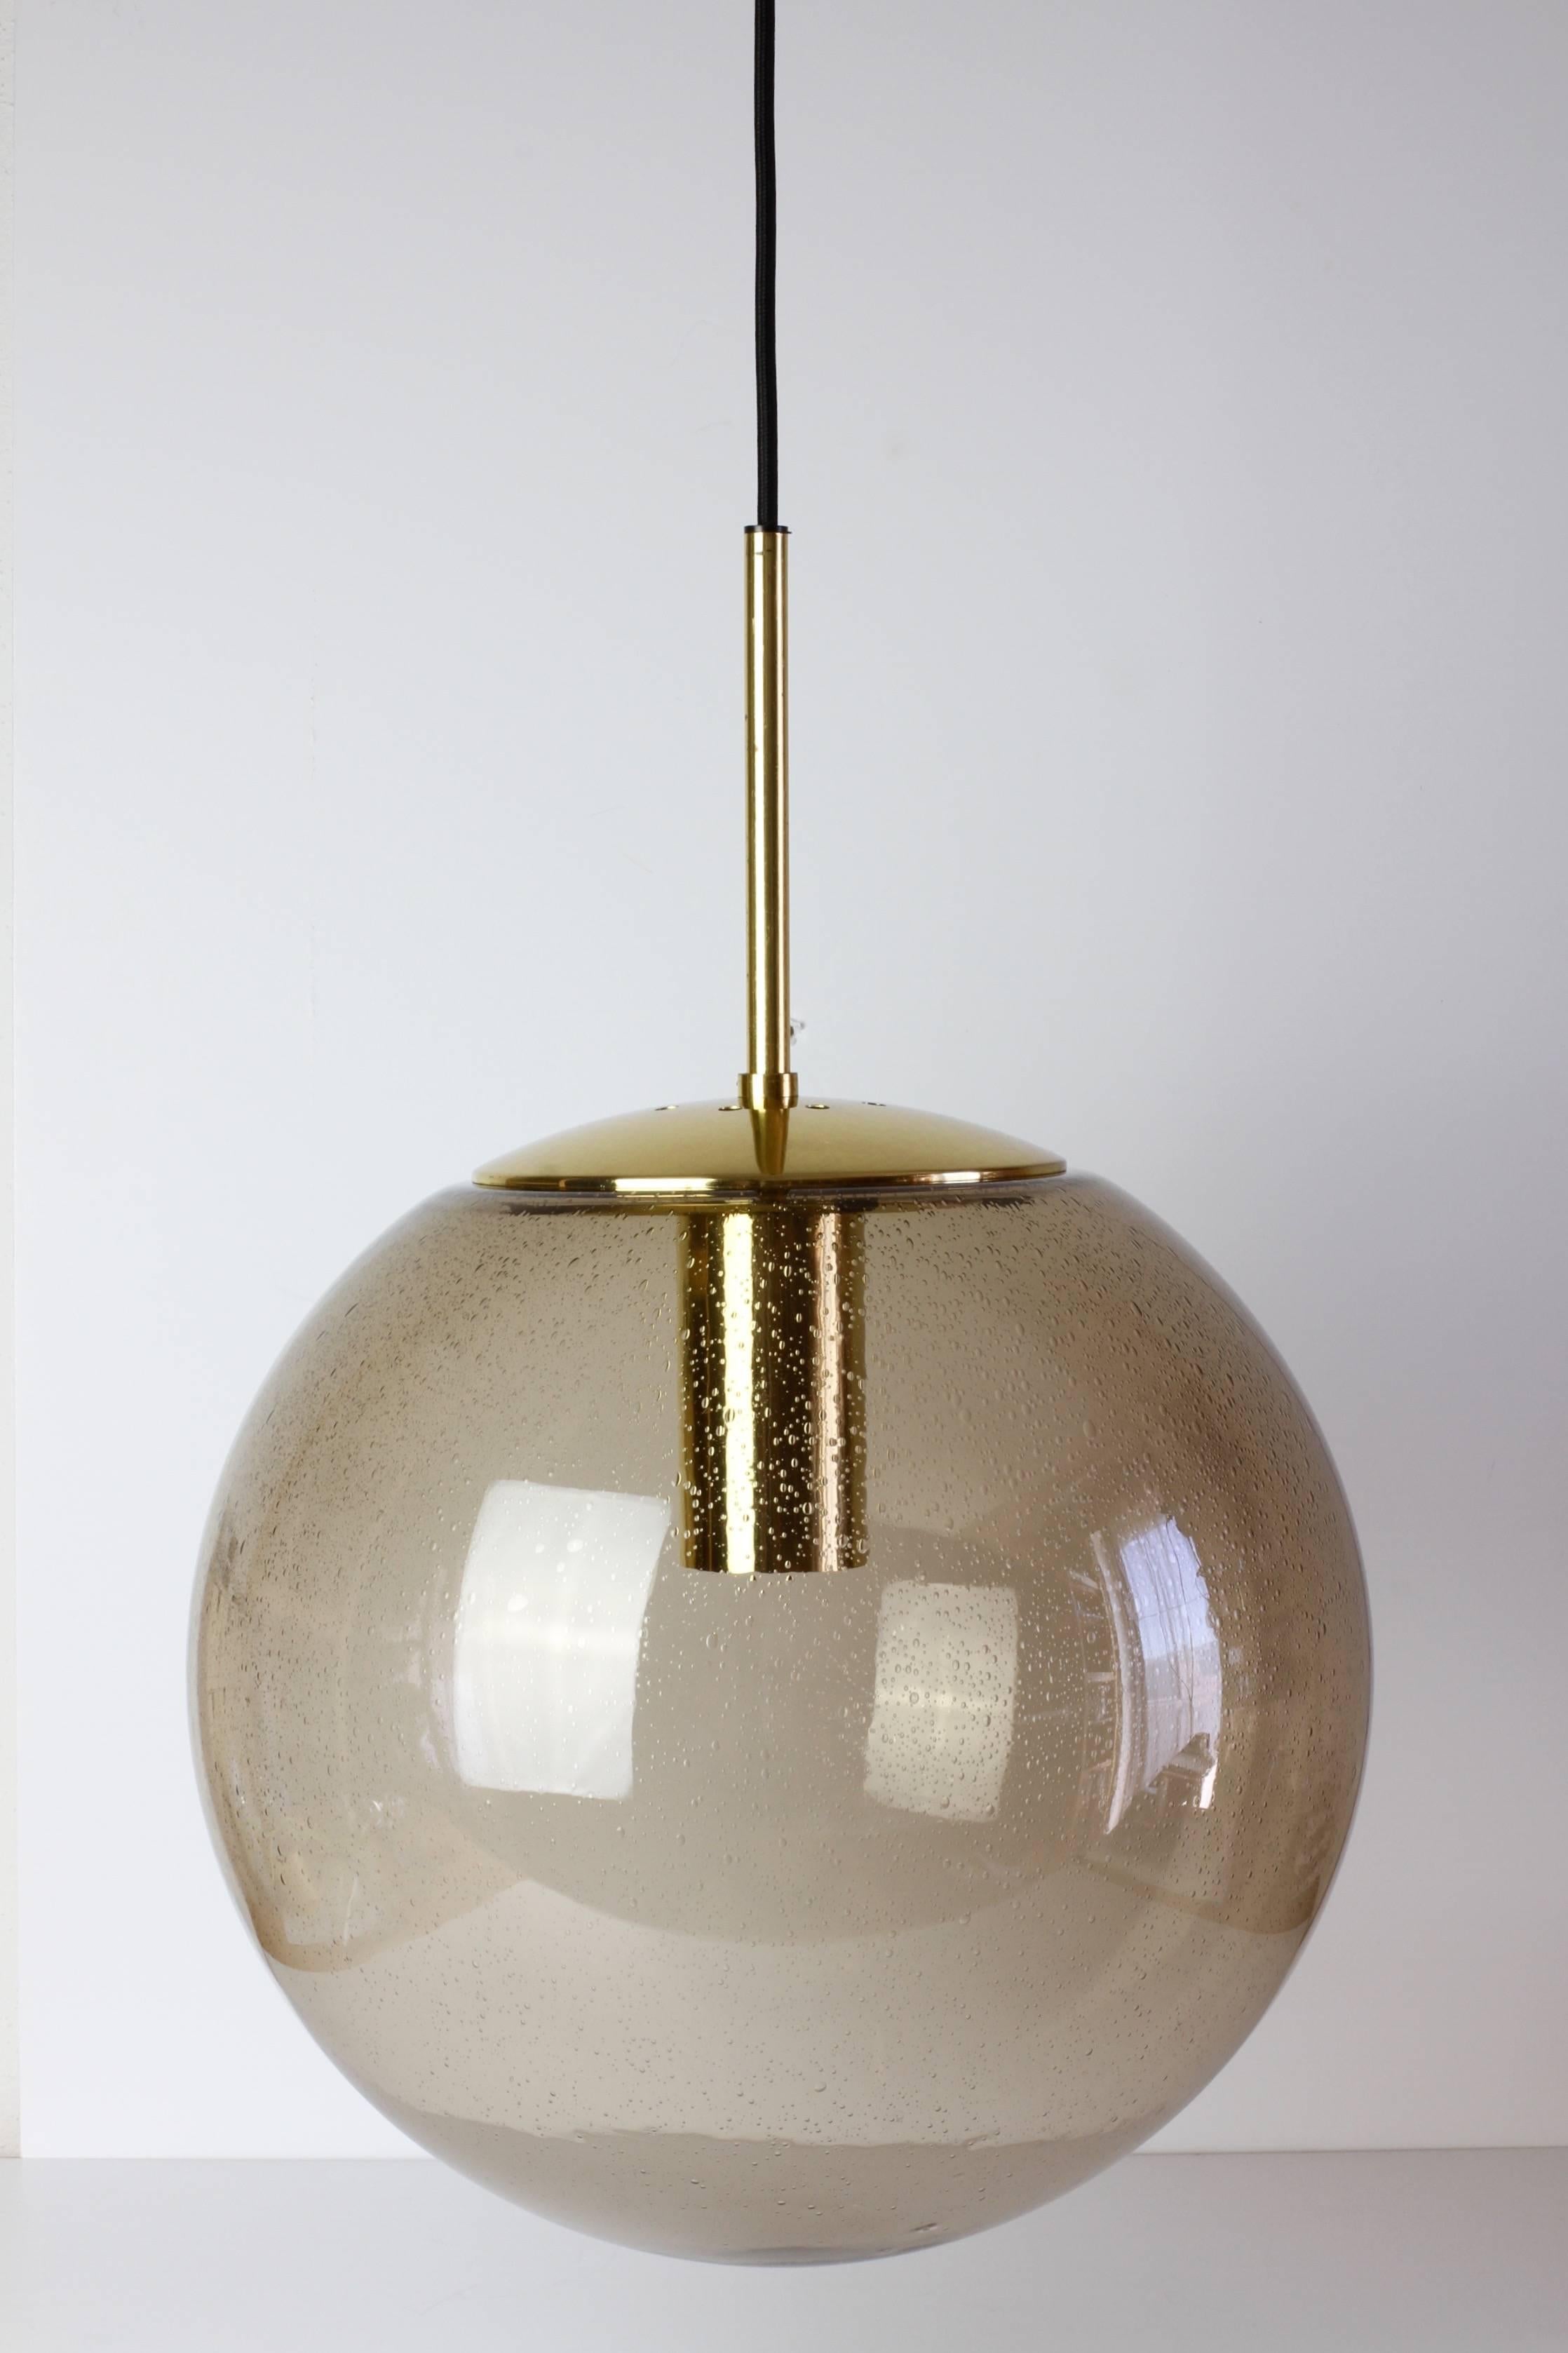 Large mid-century hanging bubble glass pendant lights by Glashütte Limburg. Made in the late 1960s throughout to the late 1970s, this gorgeous light features a mouth blown smoked glass globe containing many tiny bubbles resembling water droplets.